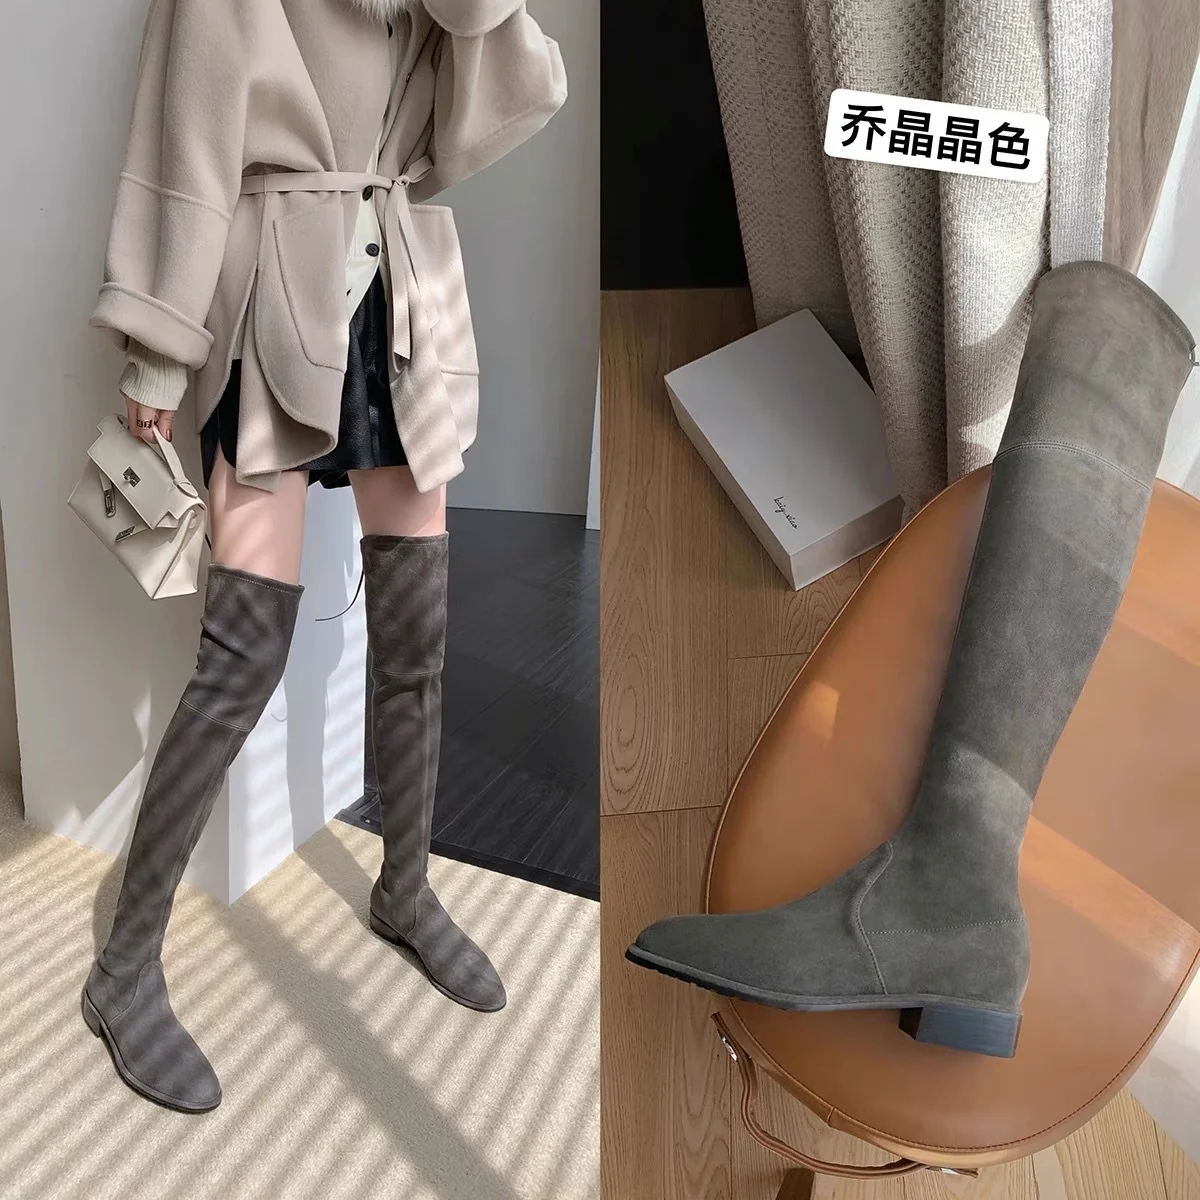 

Grape mother studiolee autumn and winter new plush high barrel Knight boots women's thick heel SW elastic knee high boots